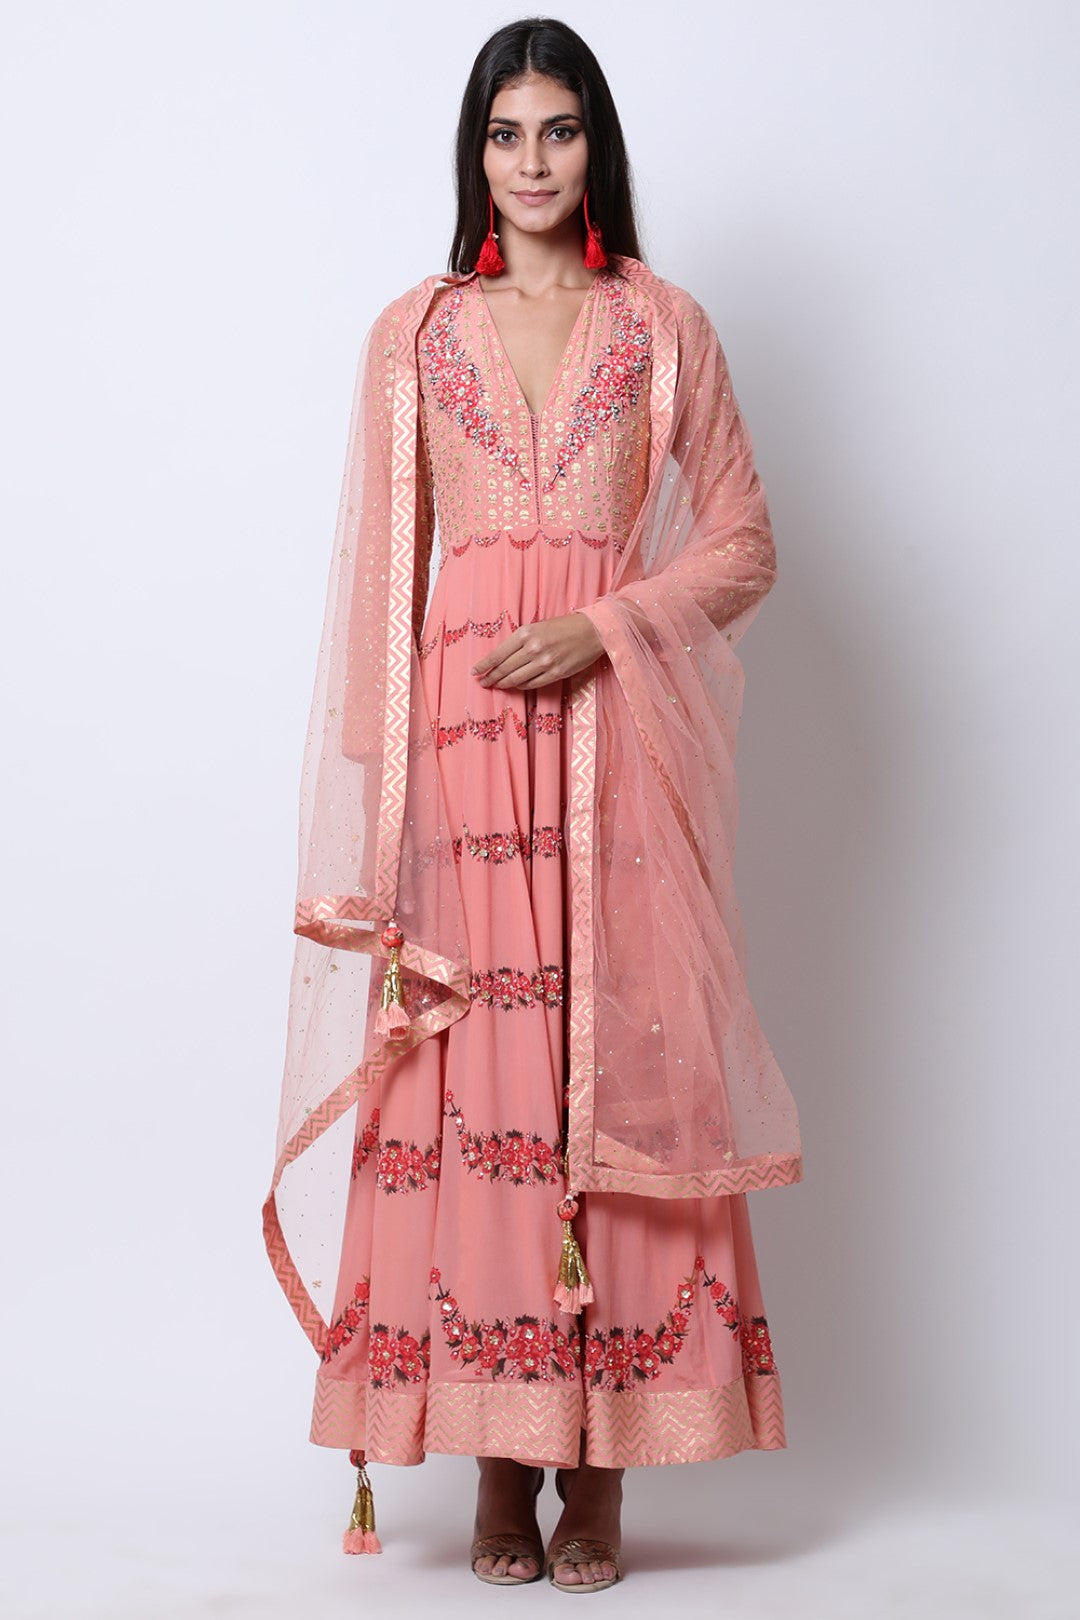 Vintage Rose scallop and gold printed kalidar  with mukesh embroidered dupatta and churidar.